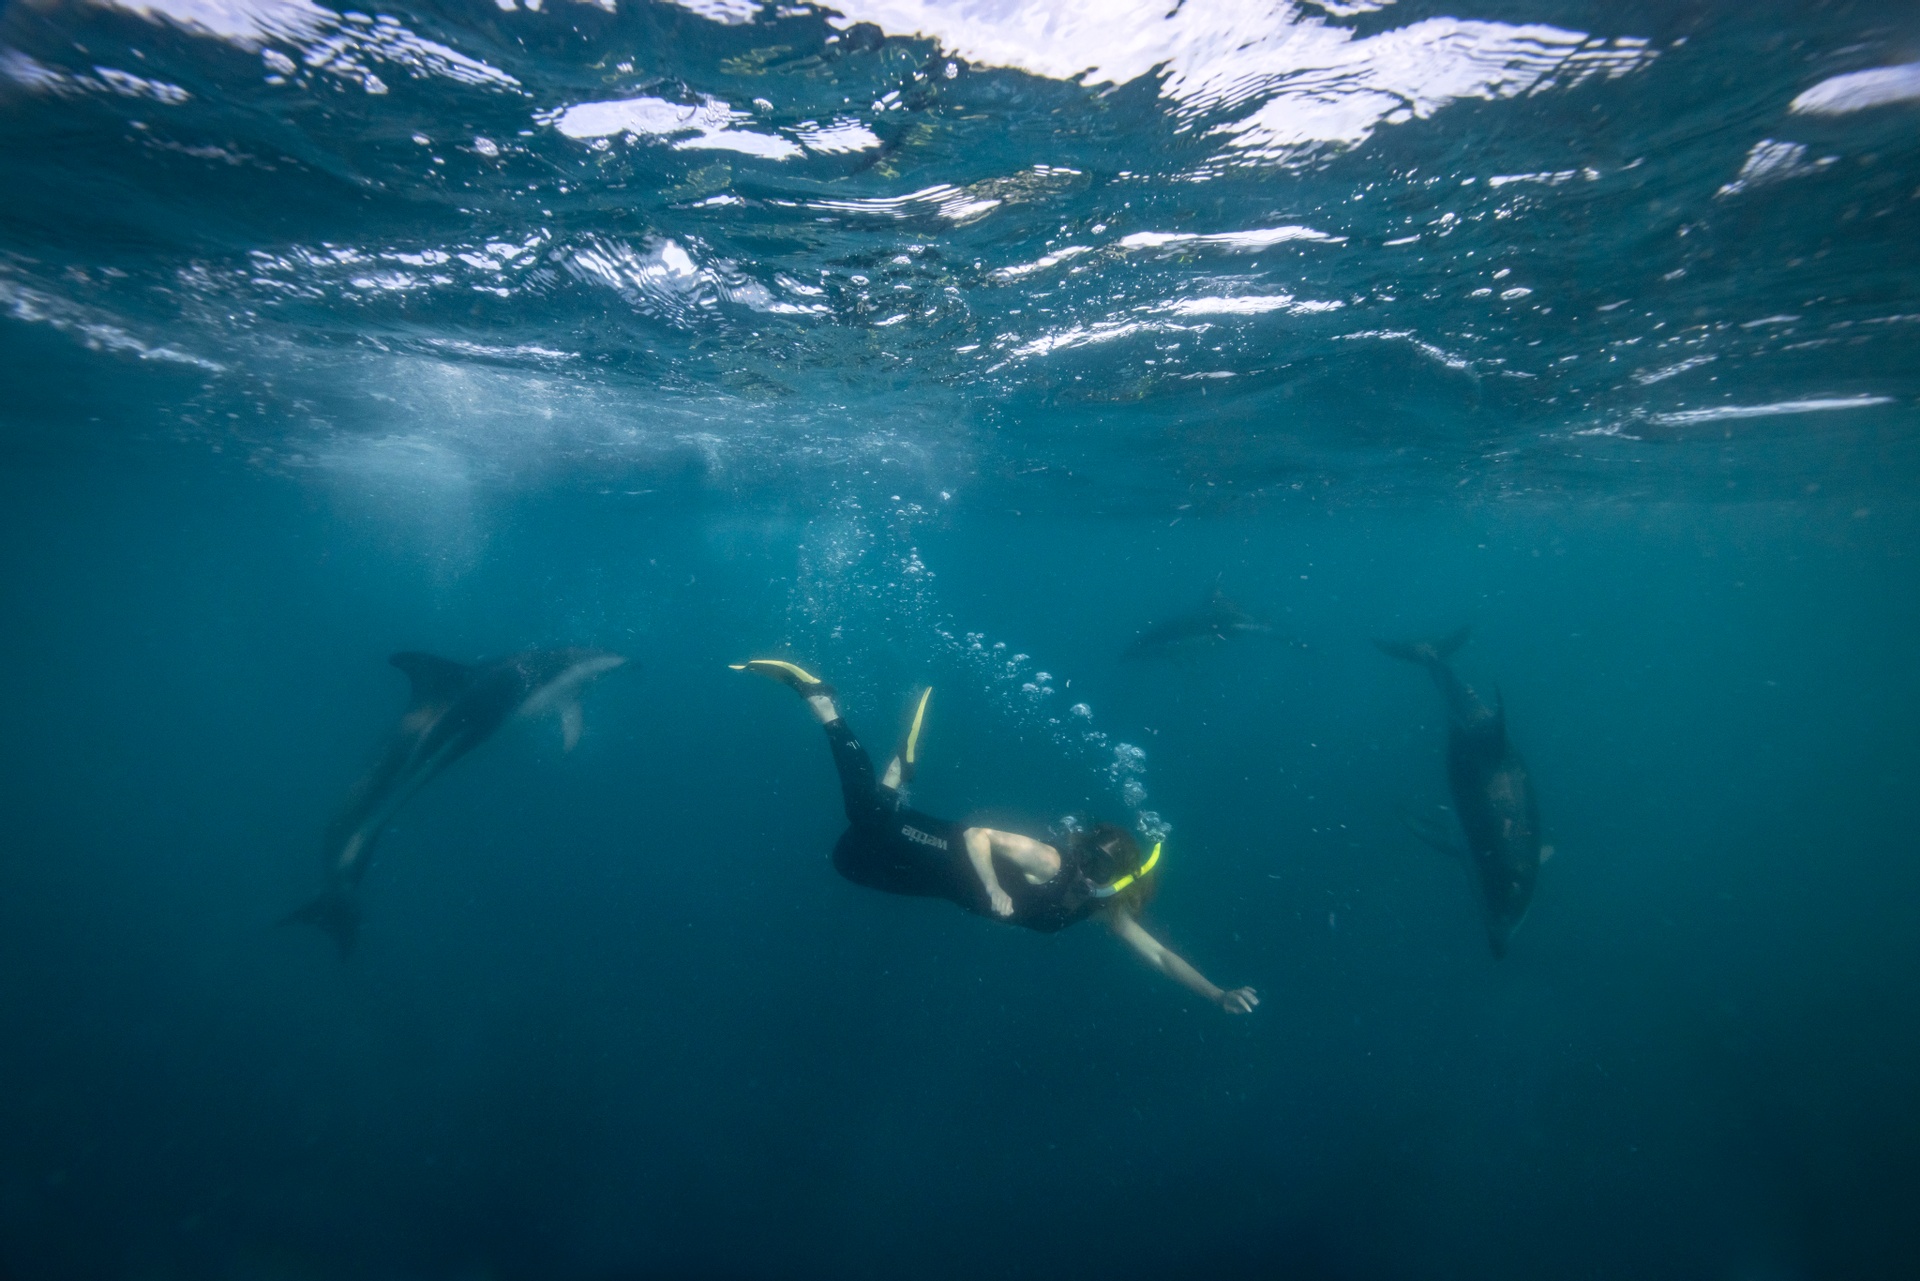 Swimming with the dolphins off Kaikoura. Image courtesy Miles Holden.